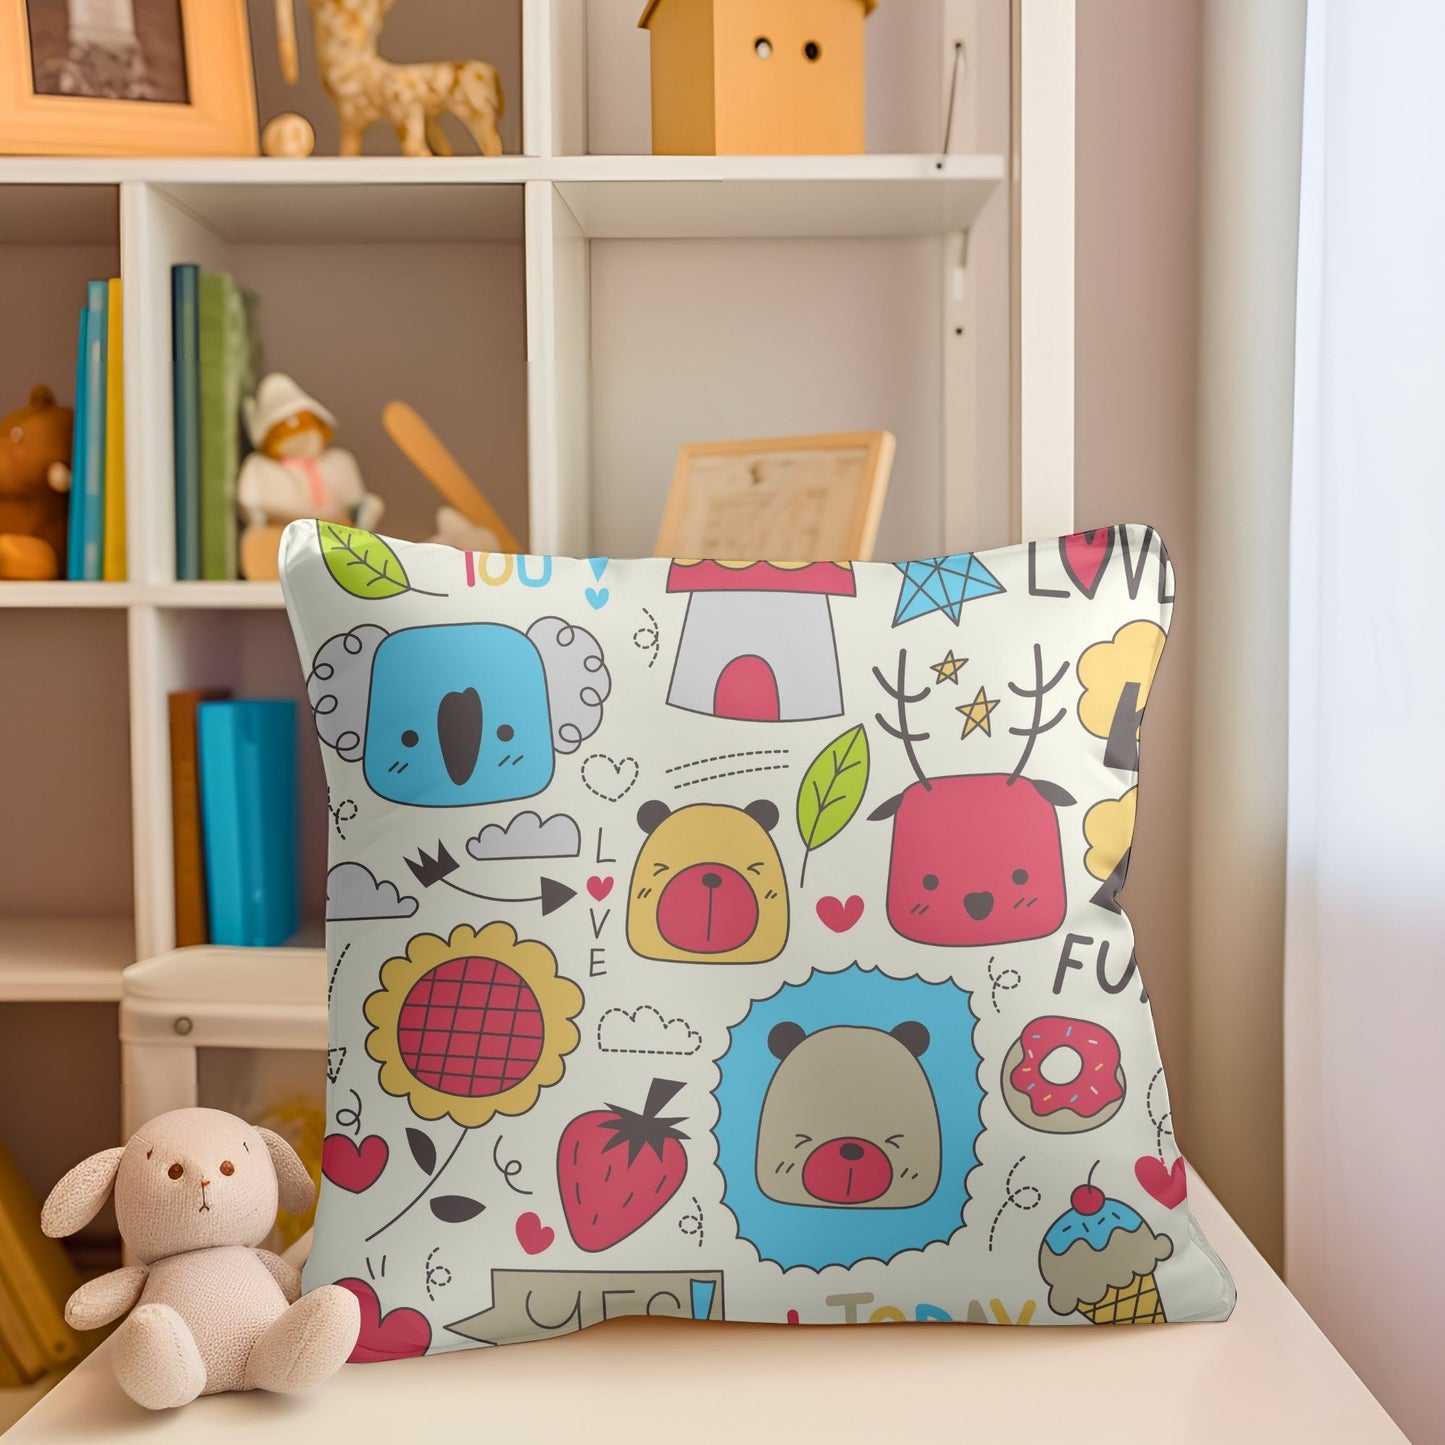 Vibrant kids pillow with charming animal designs for a whimsical atmosphere.